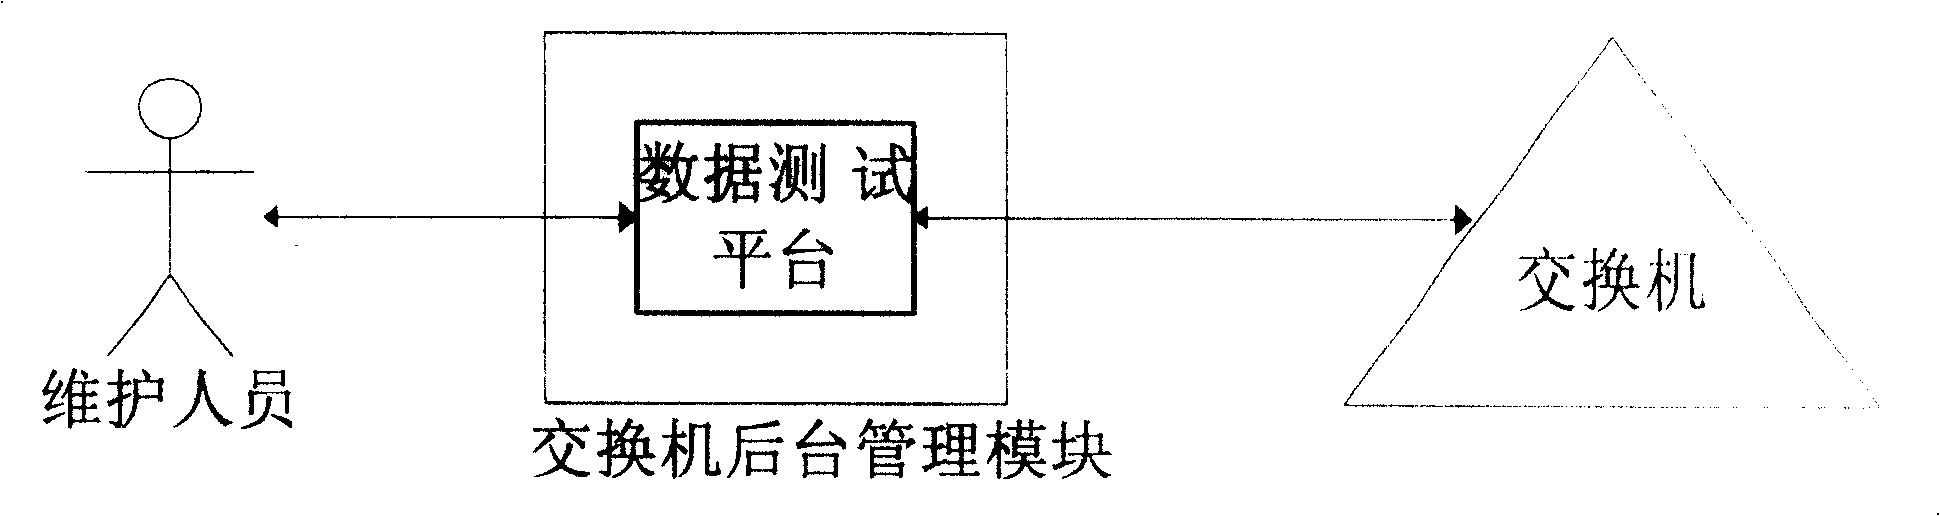 Exchange data testing system and method